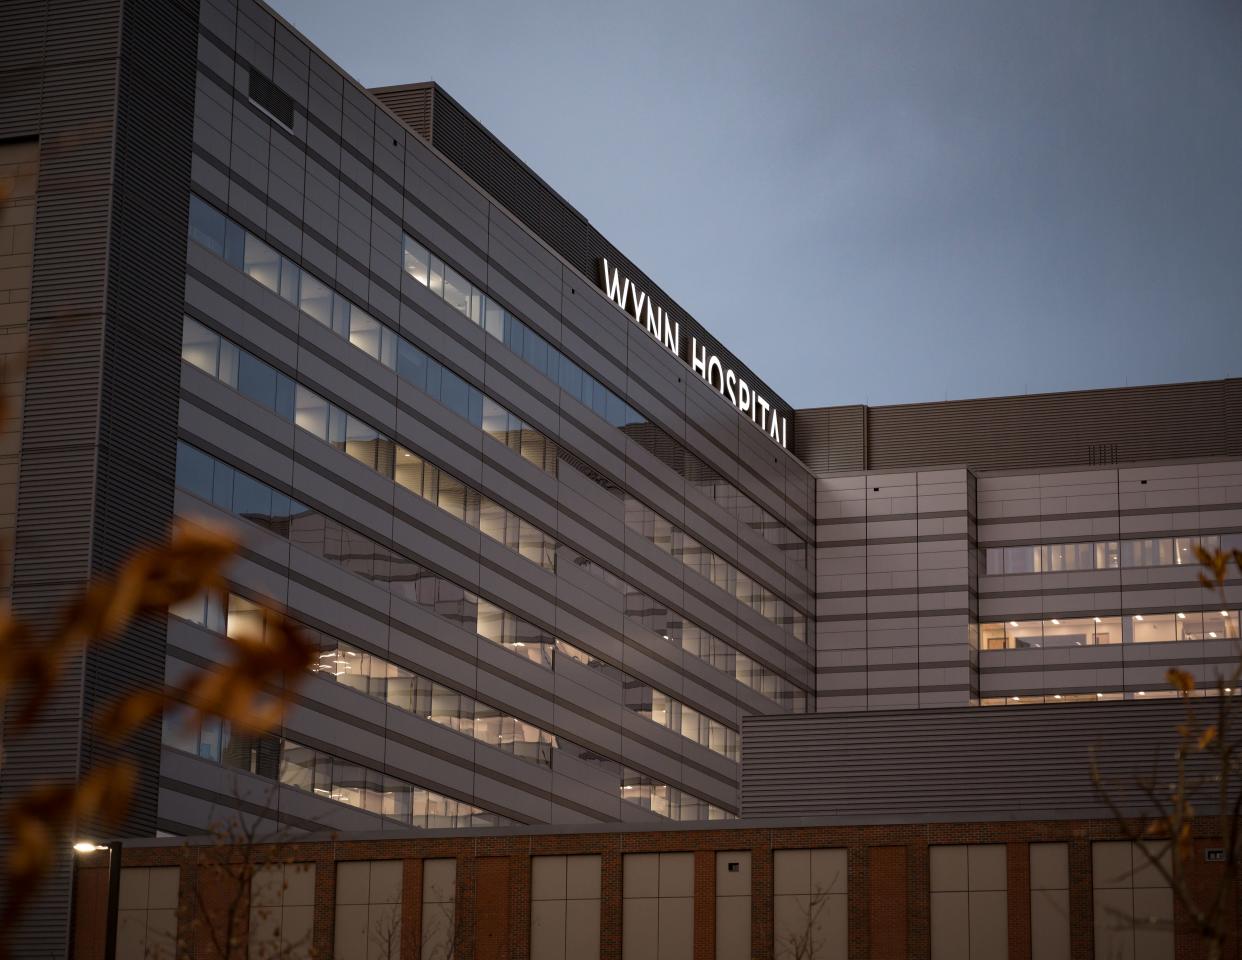 Concerns over open-heart surgery, including a New York State Department of Health warning of immediate jeopardy, have led to Mohawk Valley Health System temporarily halting the program at Wynn Hospital in Utica. The health system is making changes to the program and hiring a third party reviewer to make recommendations. Officials hope to begin performing open-heart surgeries again within weeks.